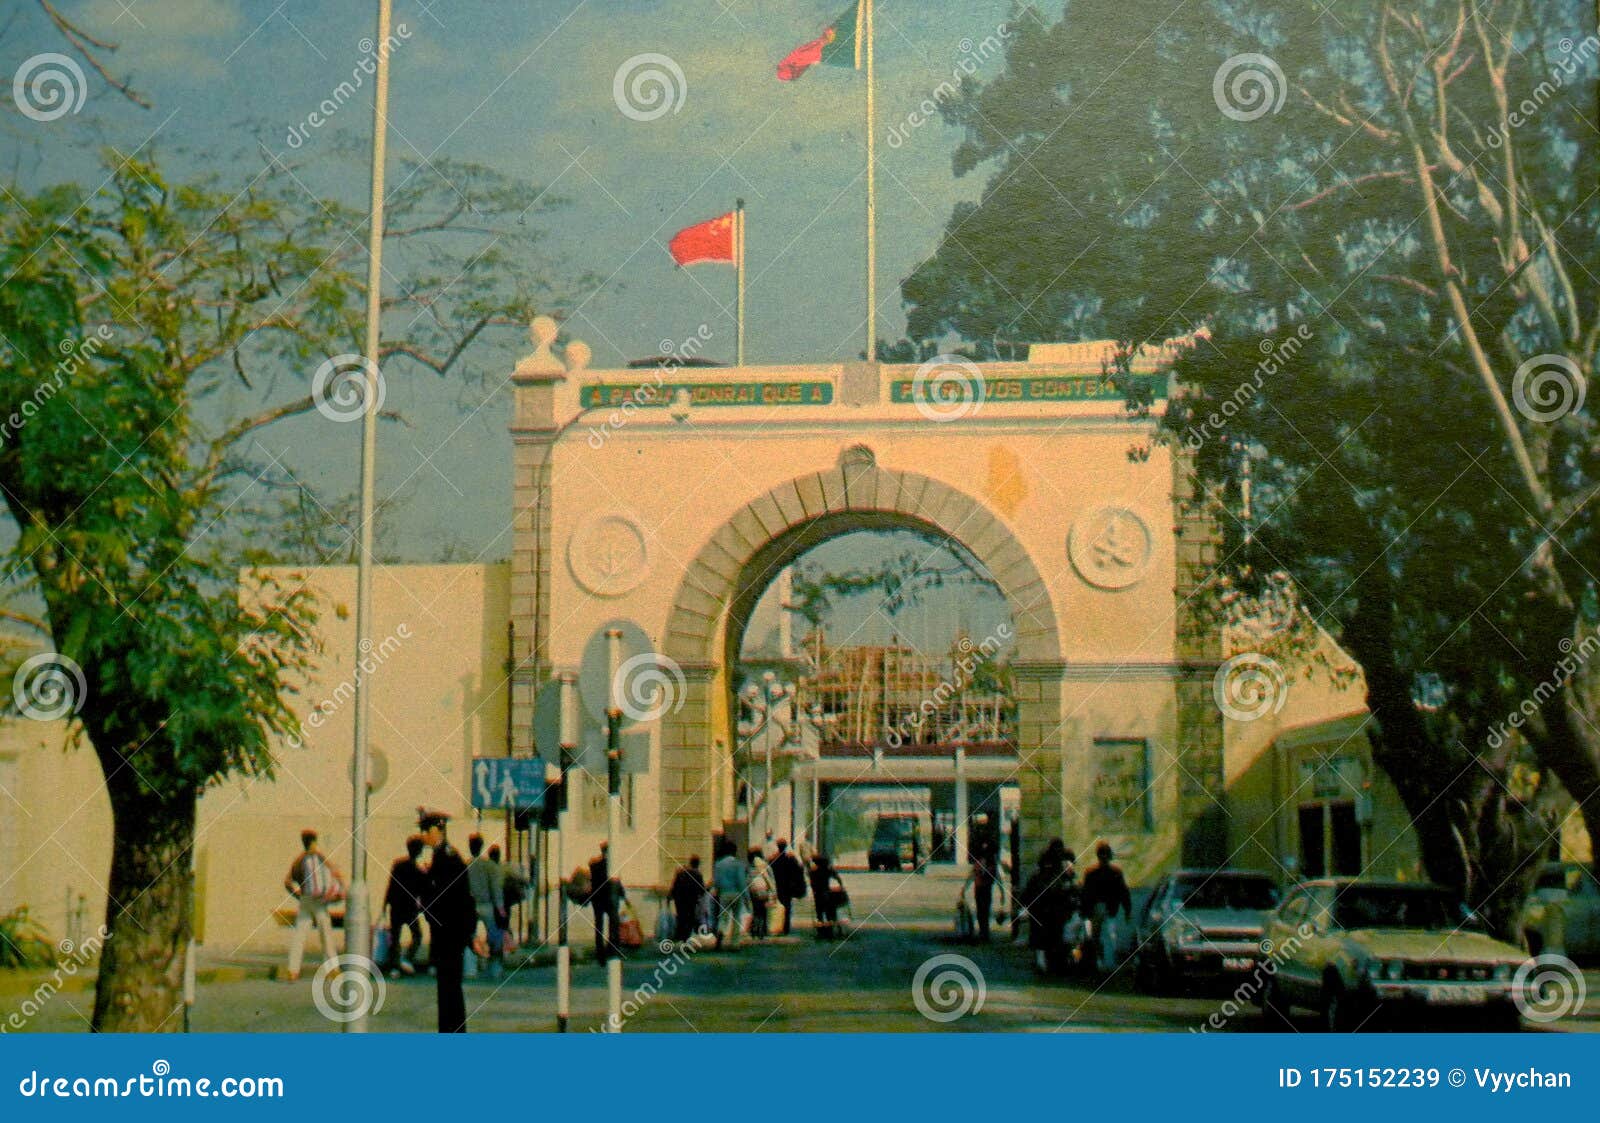 vintage-china-portugal-colonial-macau-macao-chinese-portuguese-colony-border-gate-entrance-entry-immigration-port-vintage-china-175152239.jpg